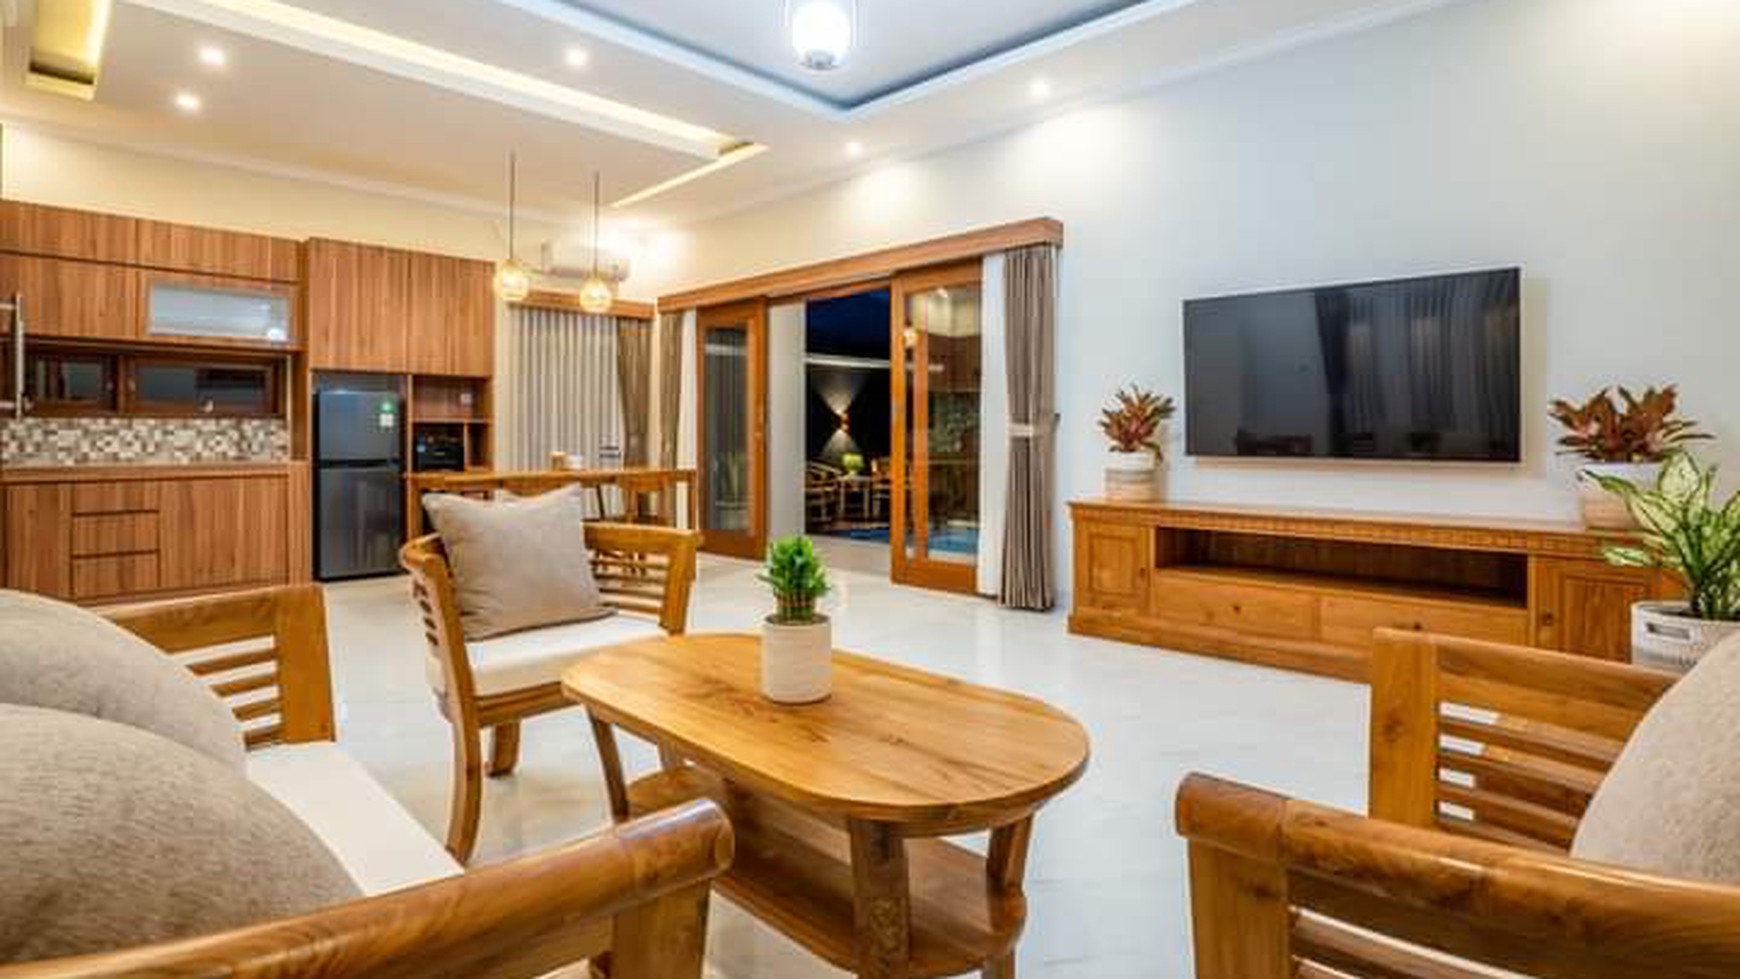 The Brand New and Freshlook Villa Cluster in Ubud